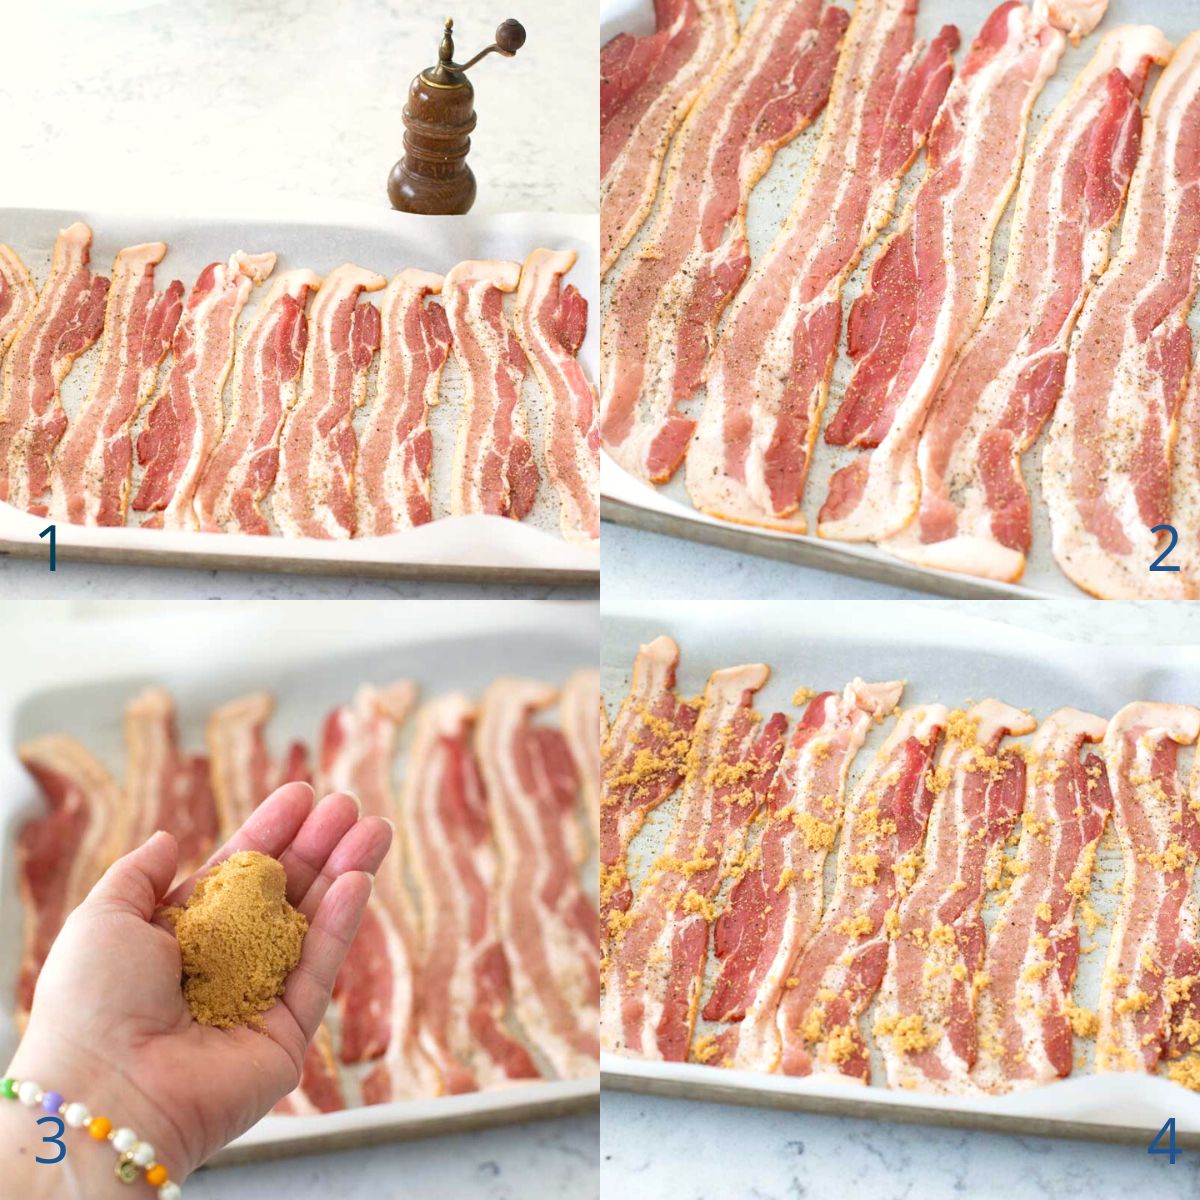 Step by step photos show how to bake bacon.